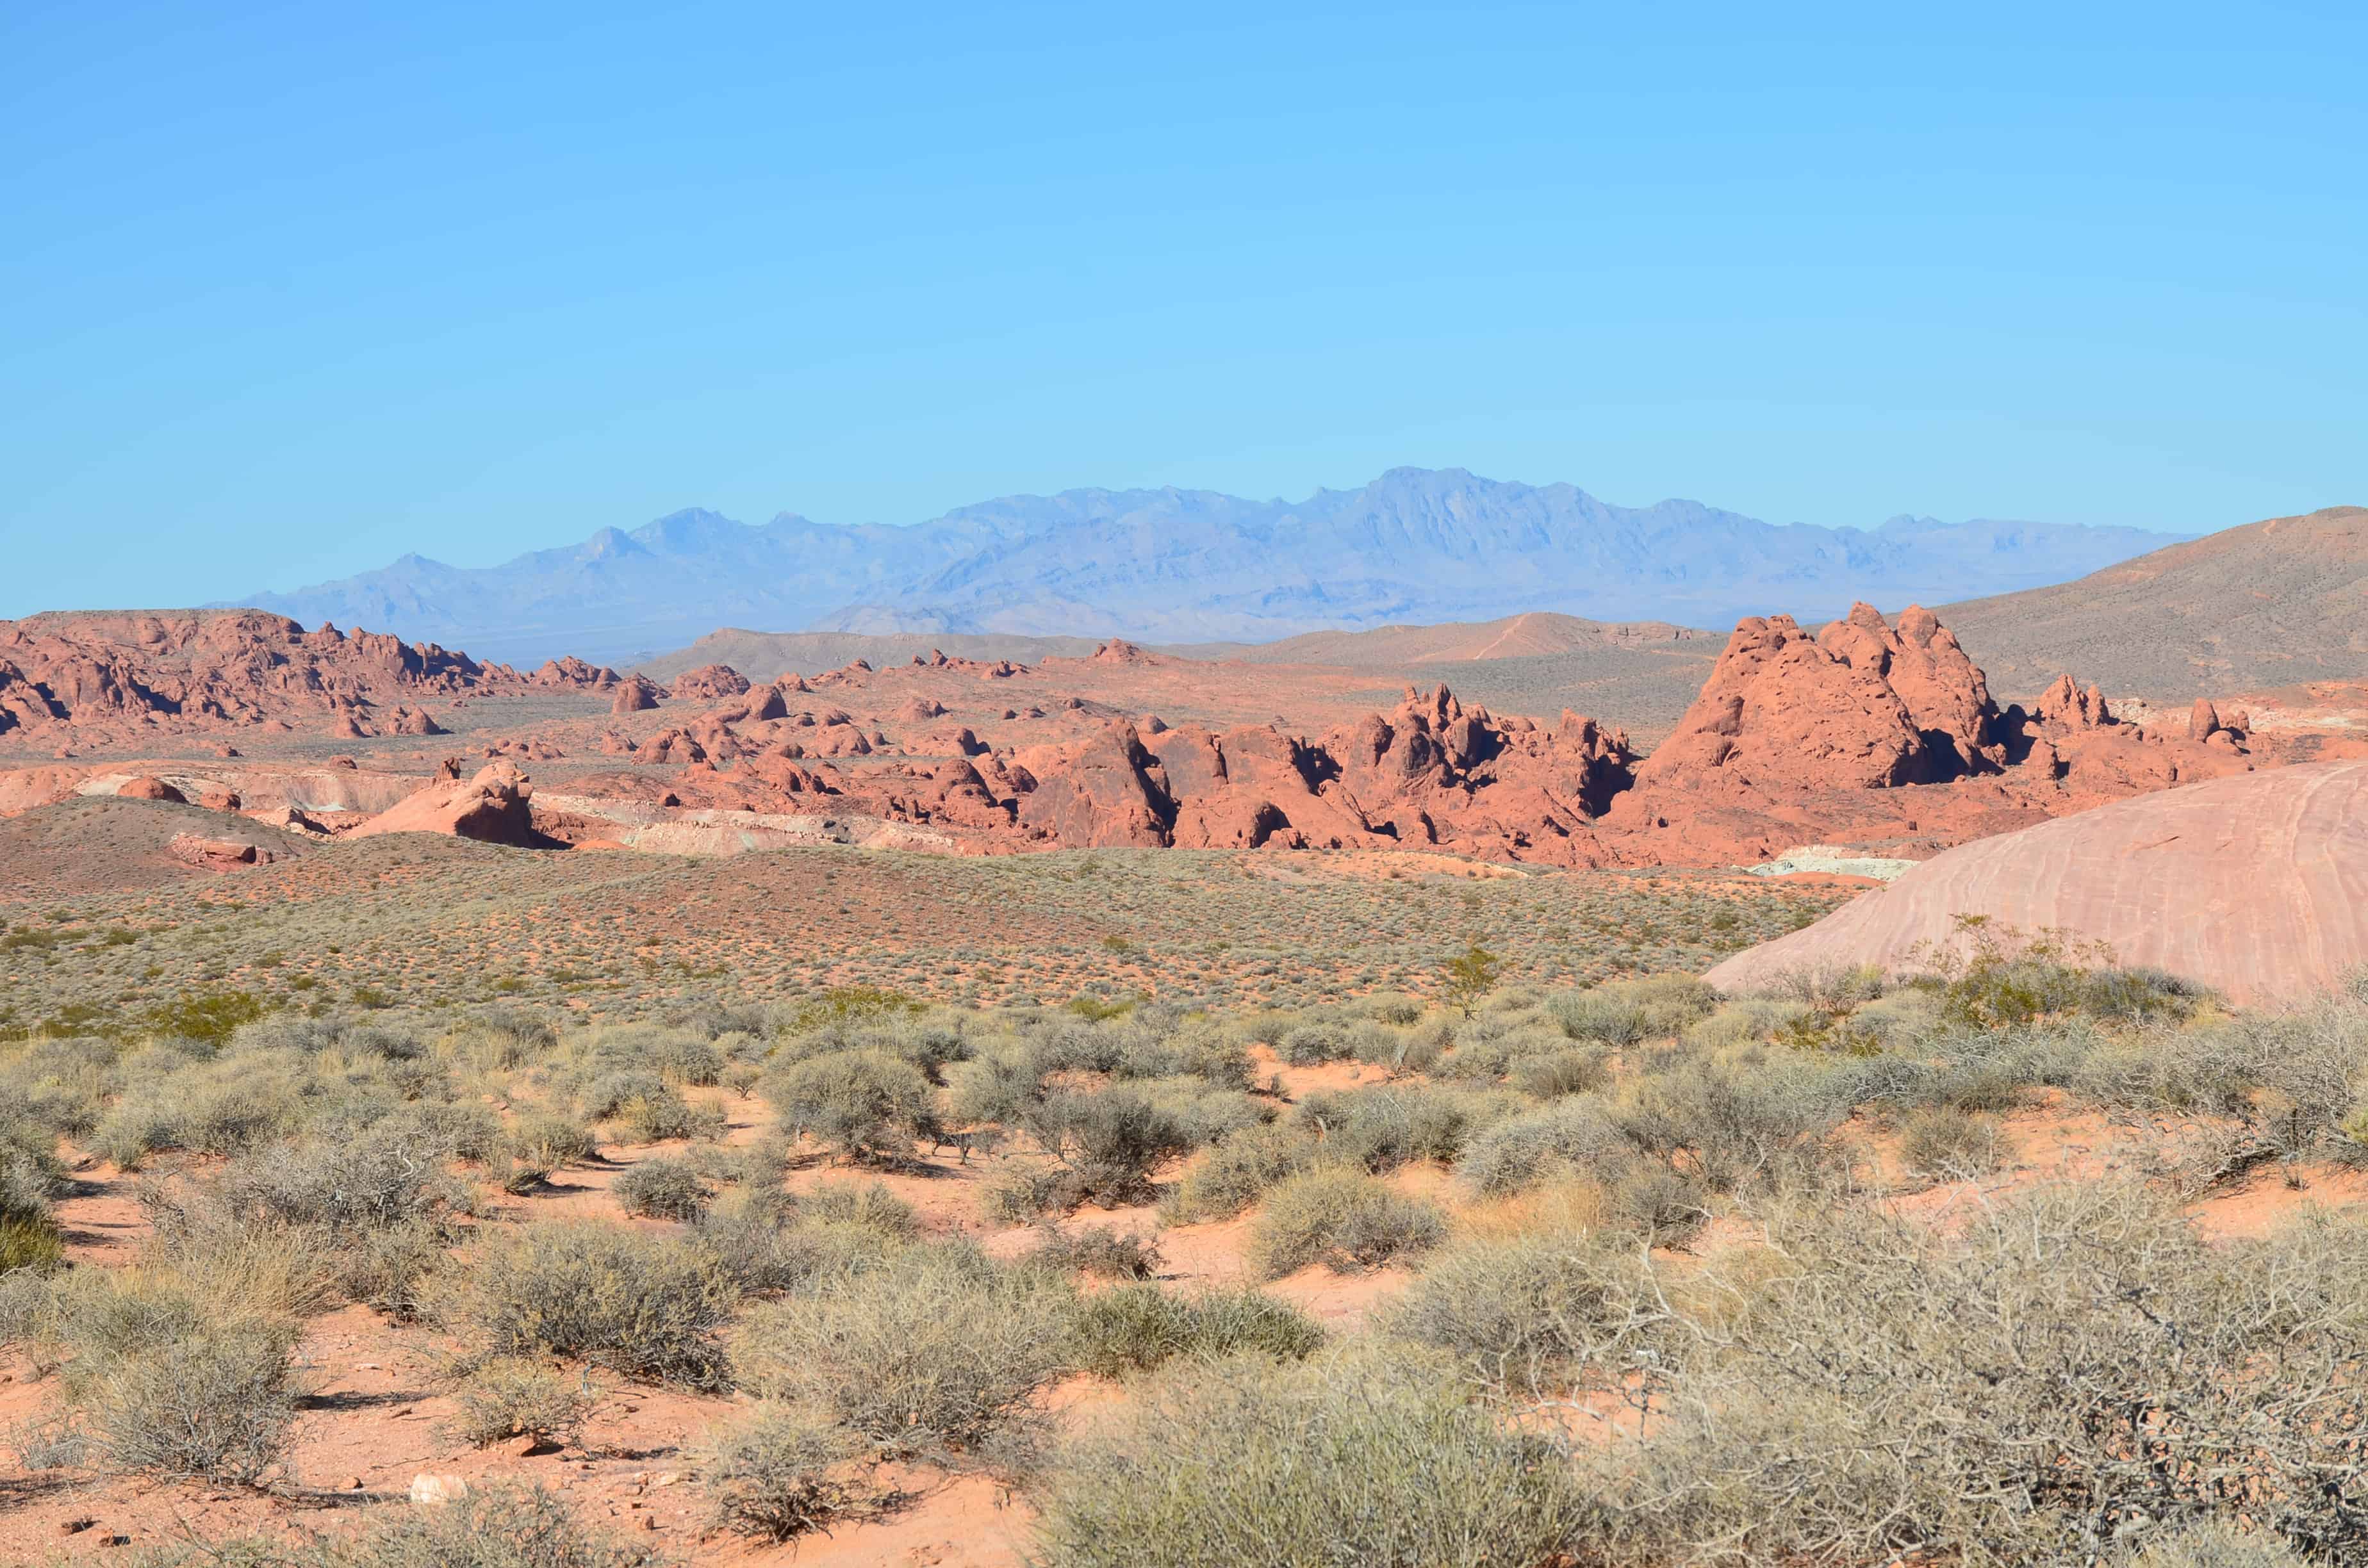 Desert landscape at Valley of Fire State Park in Nevada